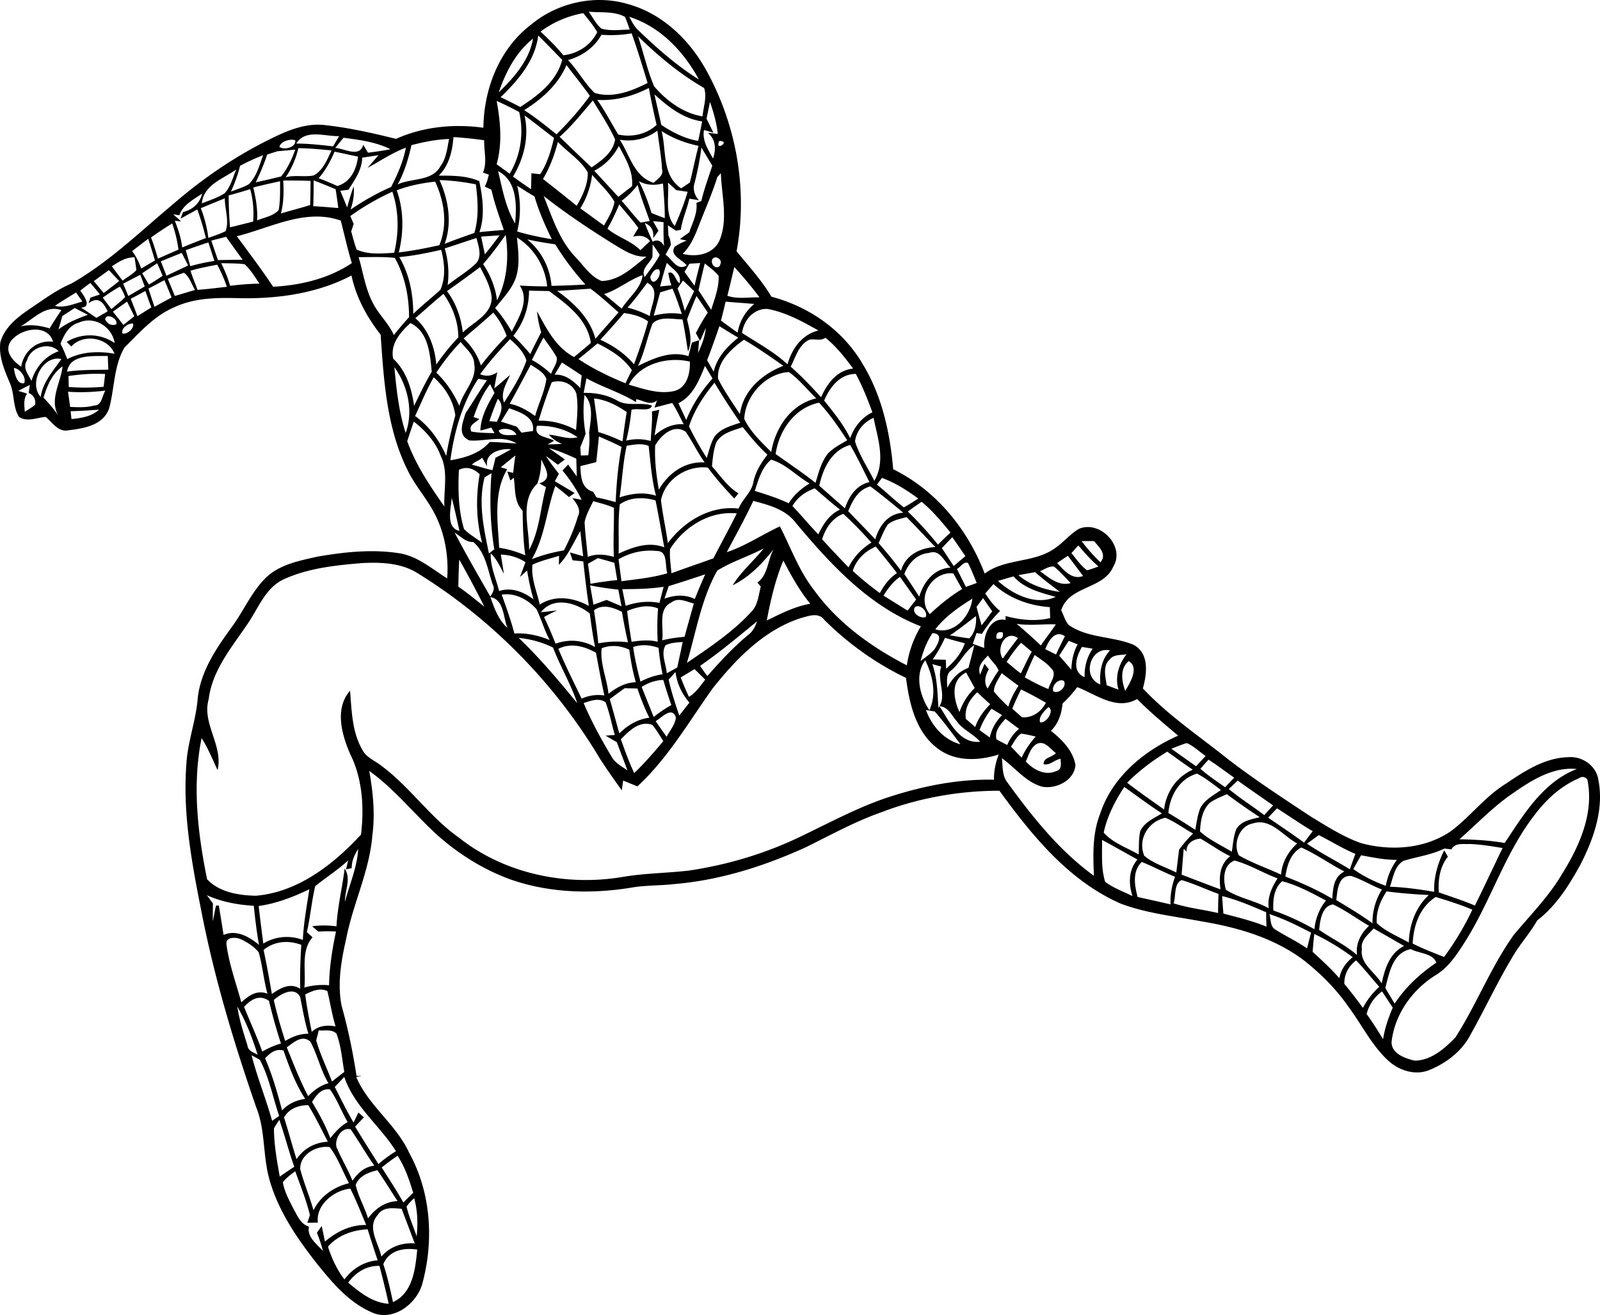 Free Spiderman Clipart Black And White, Download Free Spiderman Clipart